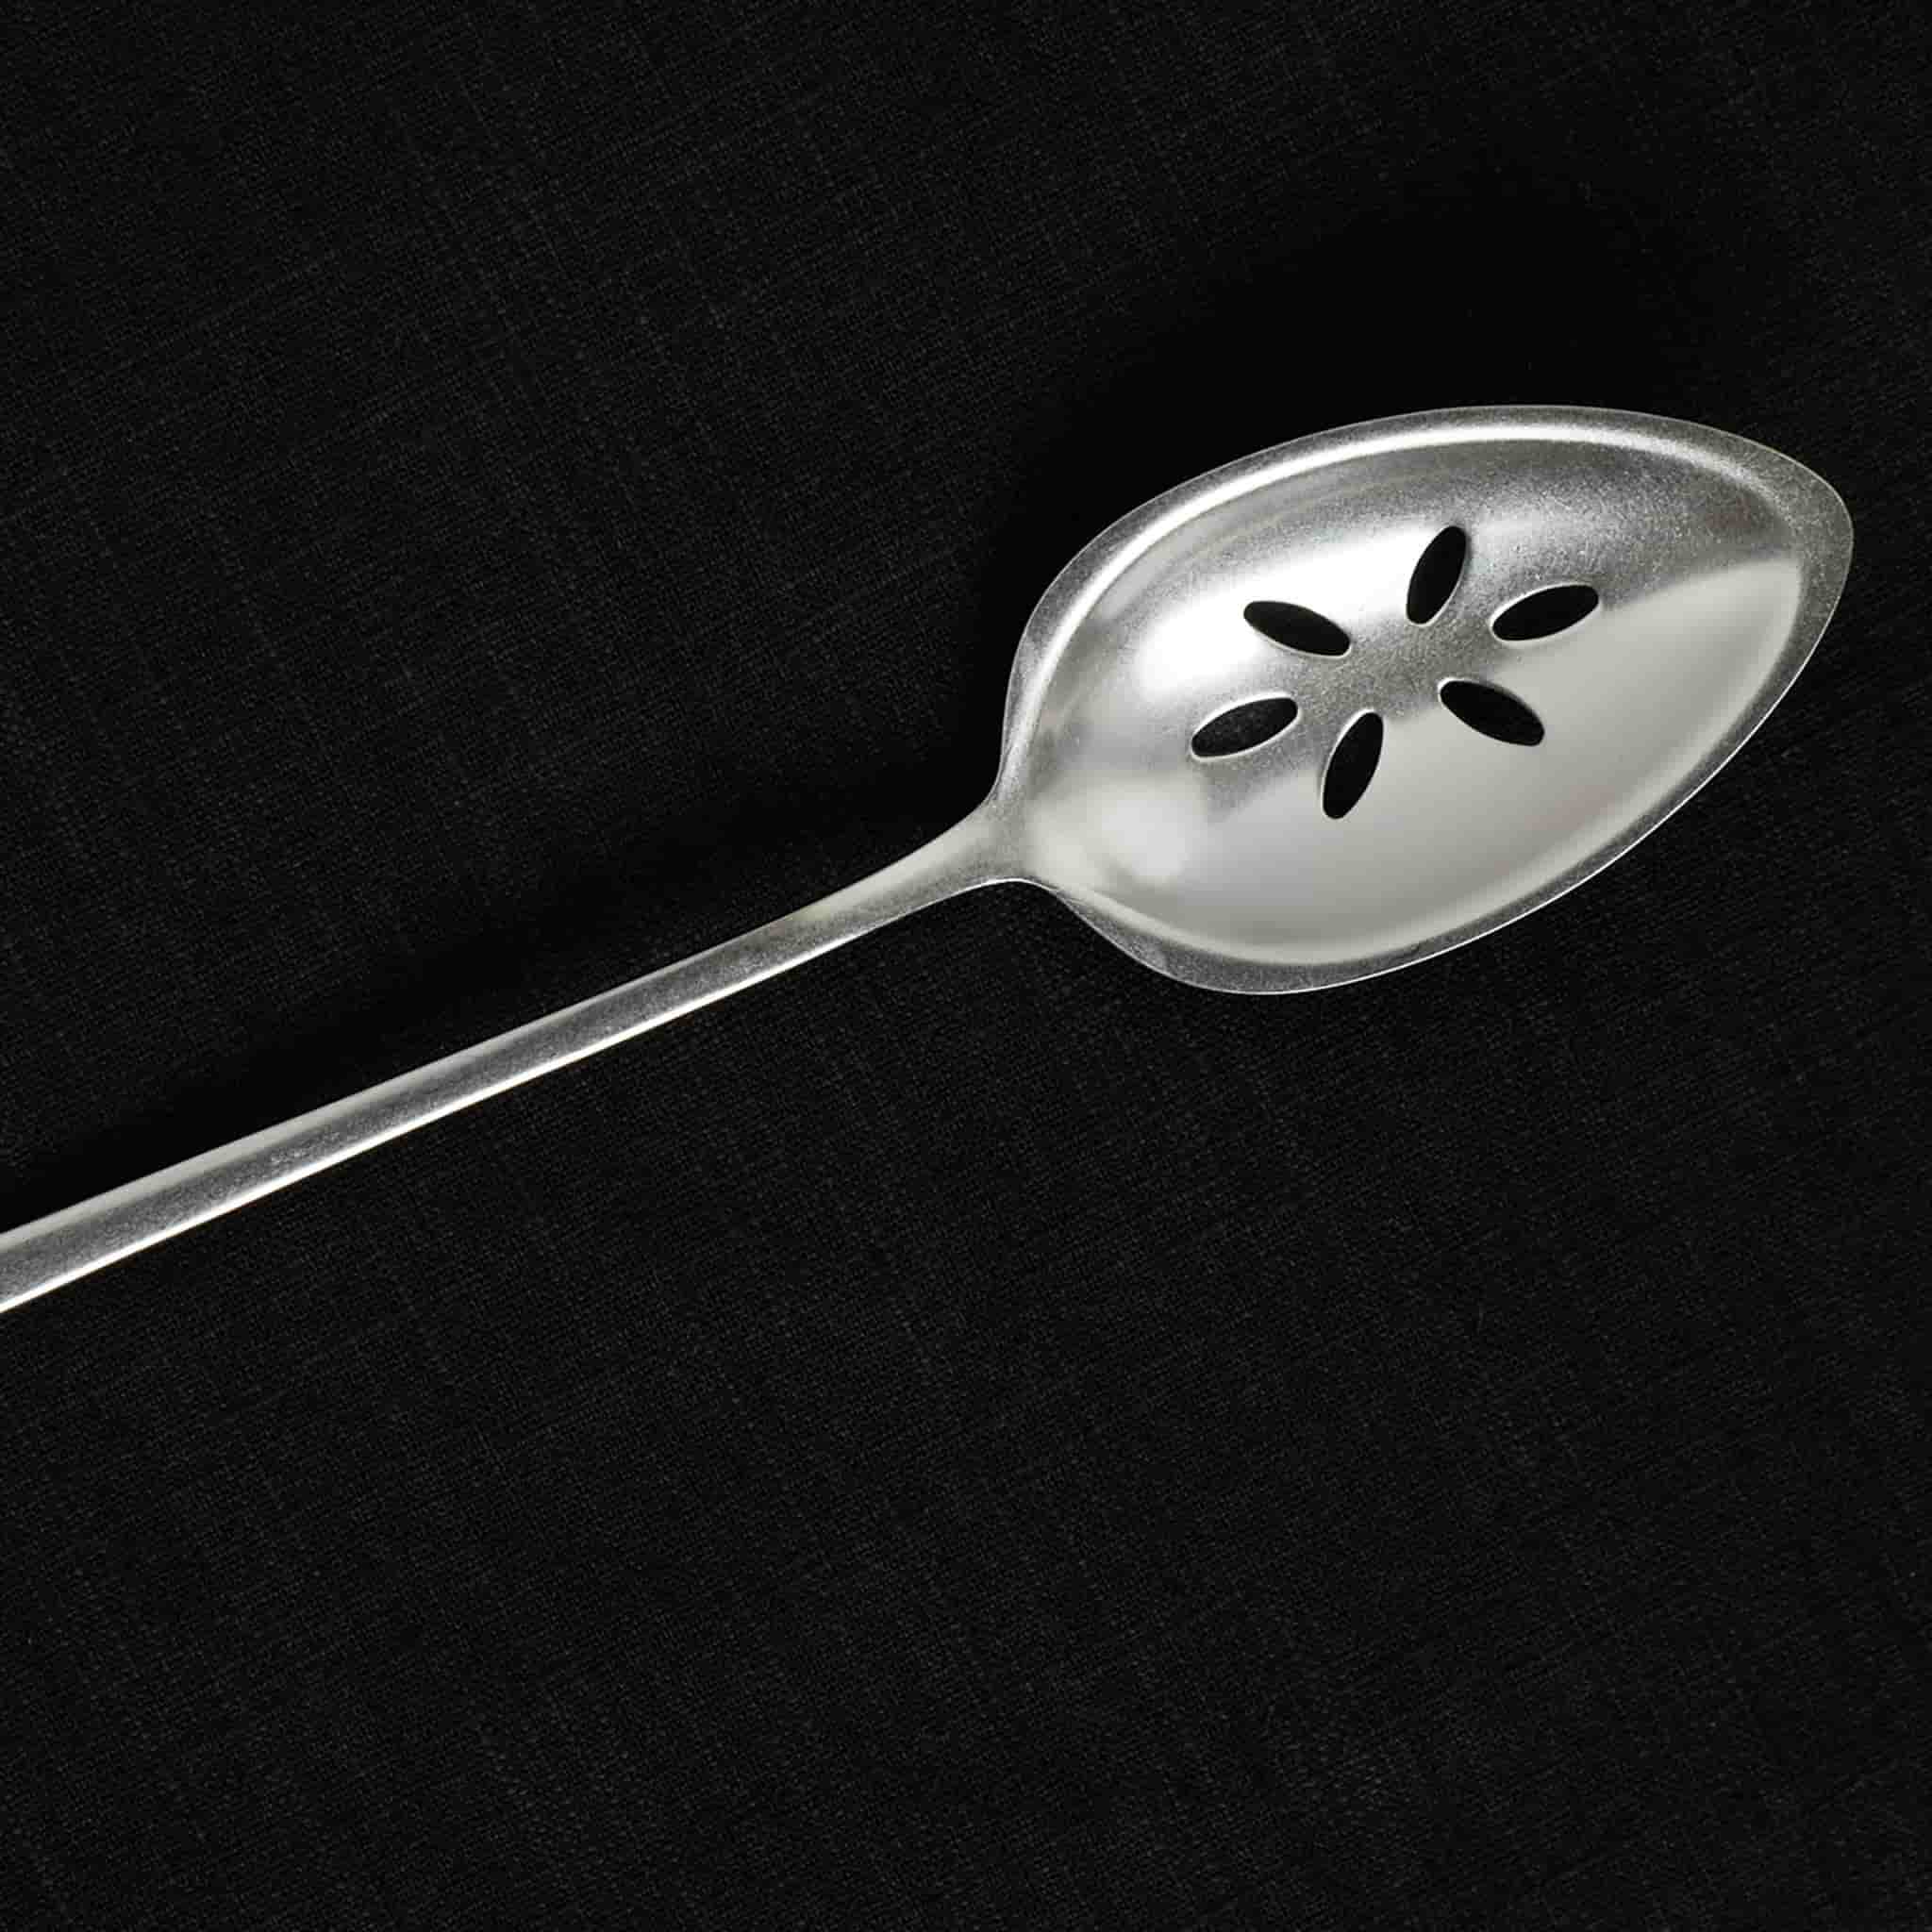 Gestura Silver Chef's Slotted Spoon